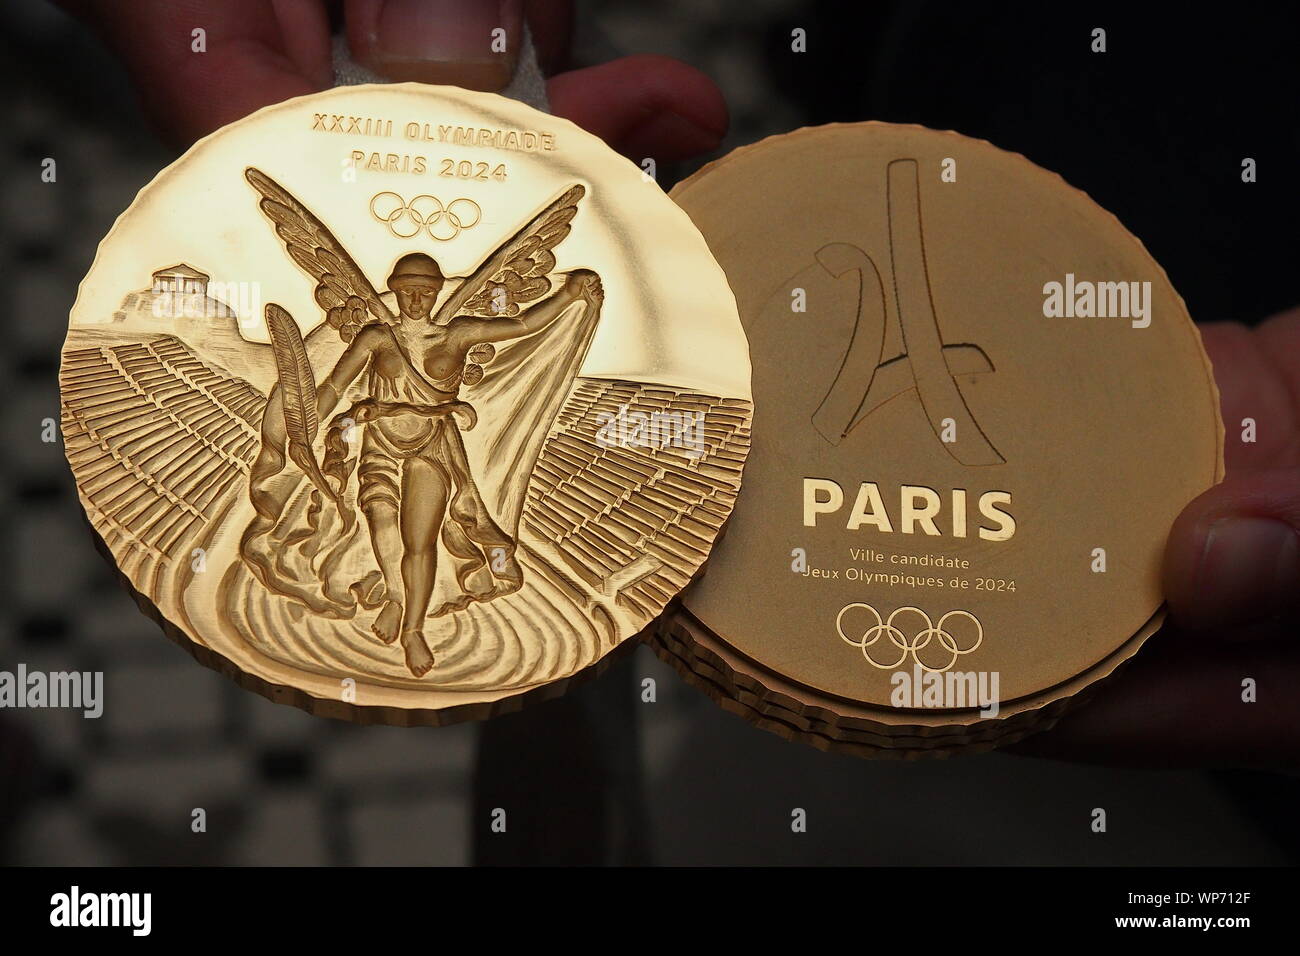 Model Of The Gold Medals That Will Be Used In The Olympic Games Paris 2024 Is Presented At The 130th Session Of The International Olympic Committee Which Is Being Held In Lima WP712F 